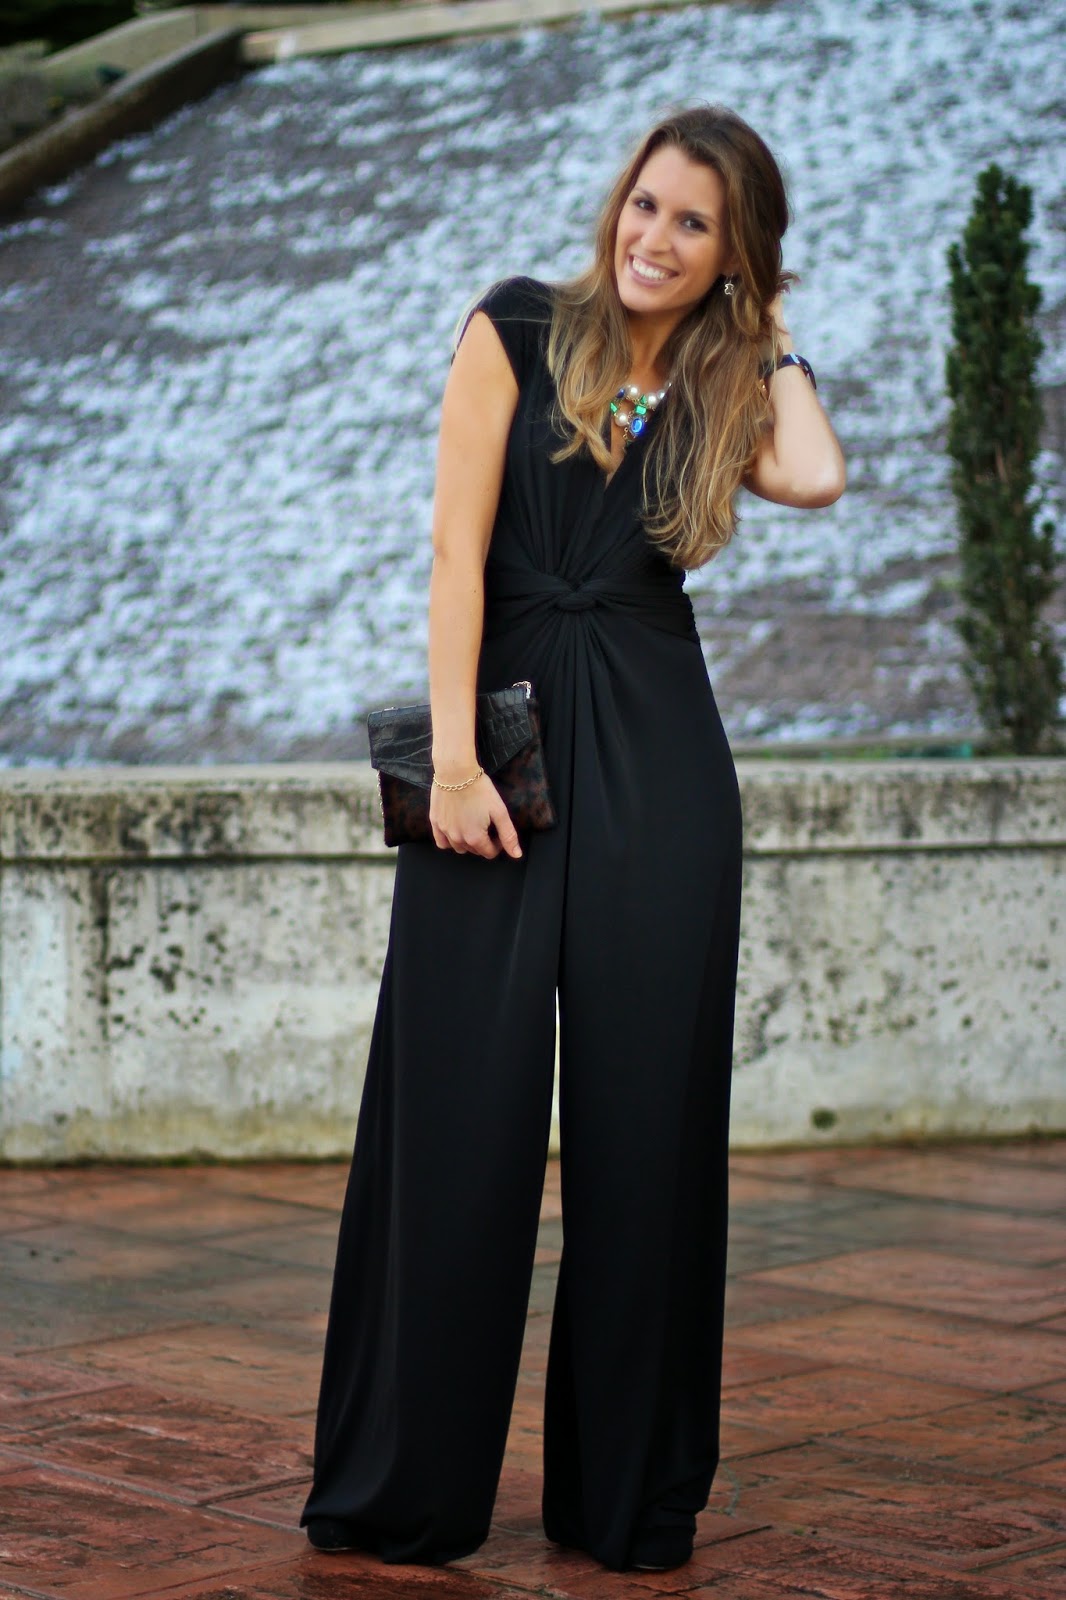 http://www.mitacondequitaypon.com/2014/12/4th-look-for-cristmas-black-jumpsuit.html